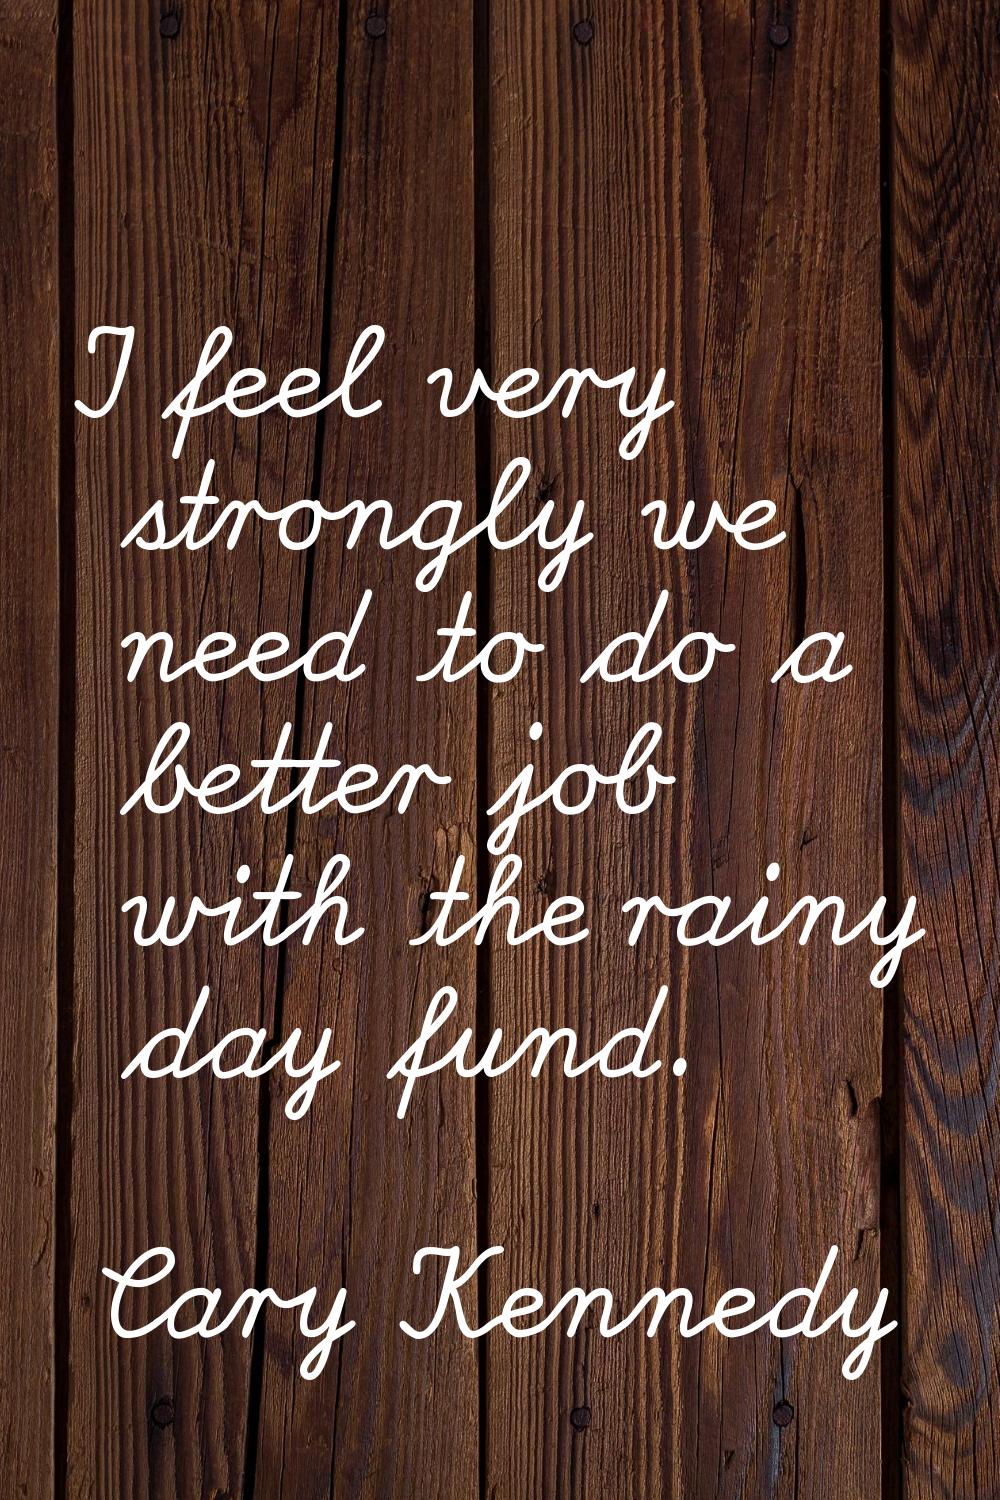 I feel very strongly we need to do a better job with the rainy day fund.